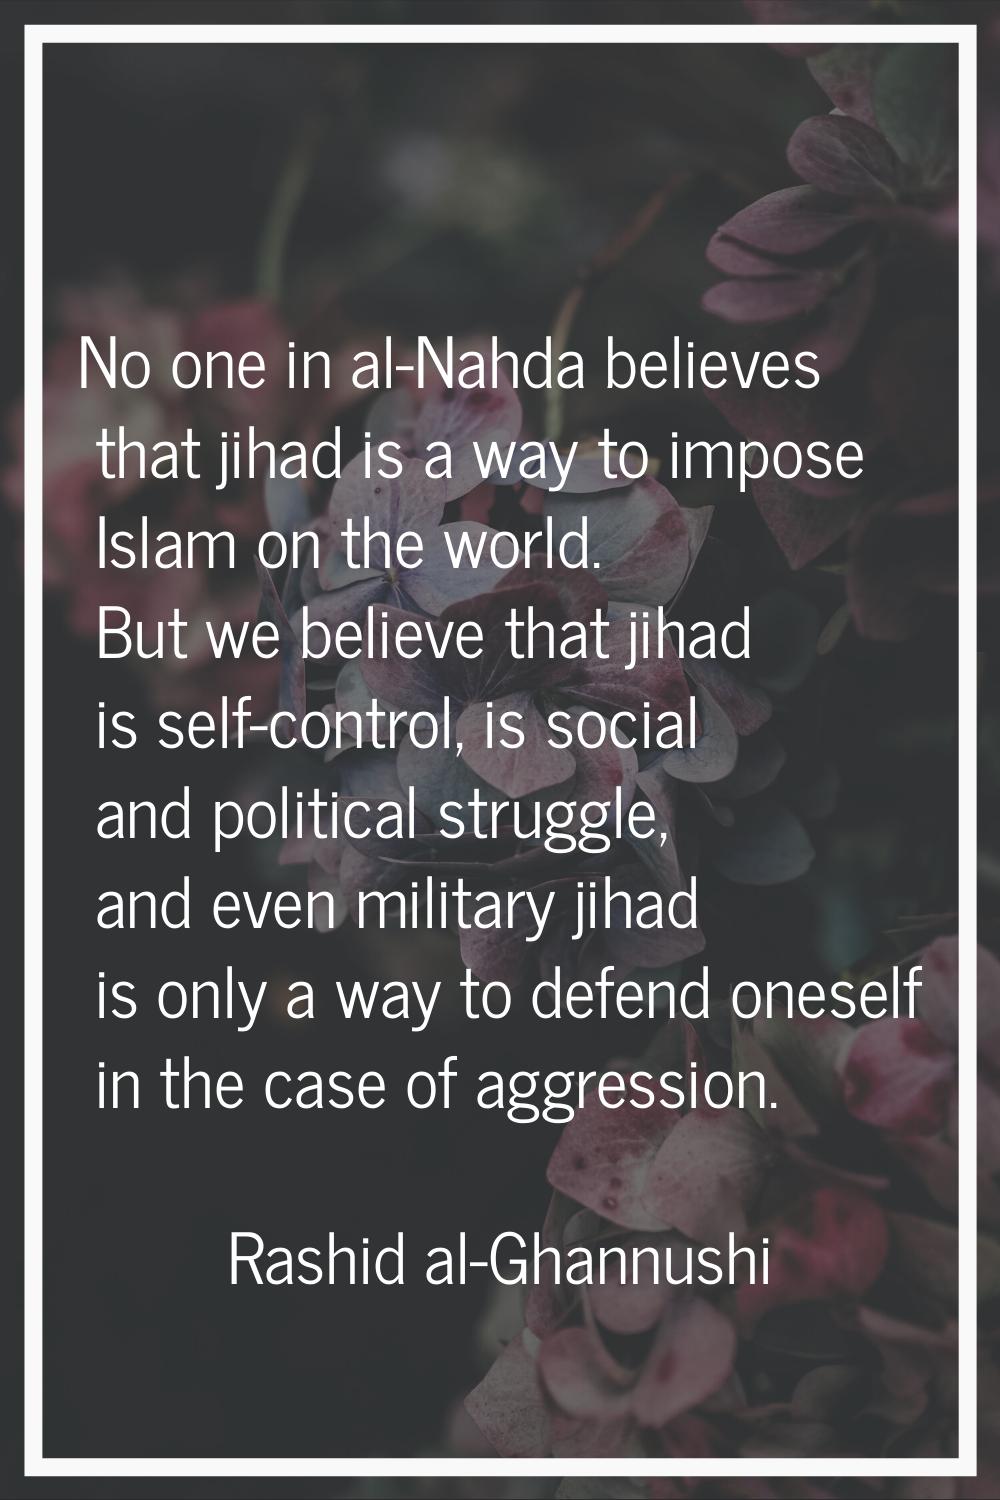 No one in al-Nahda believes that jihad is a way to impose Islam on the world. But we believe that j